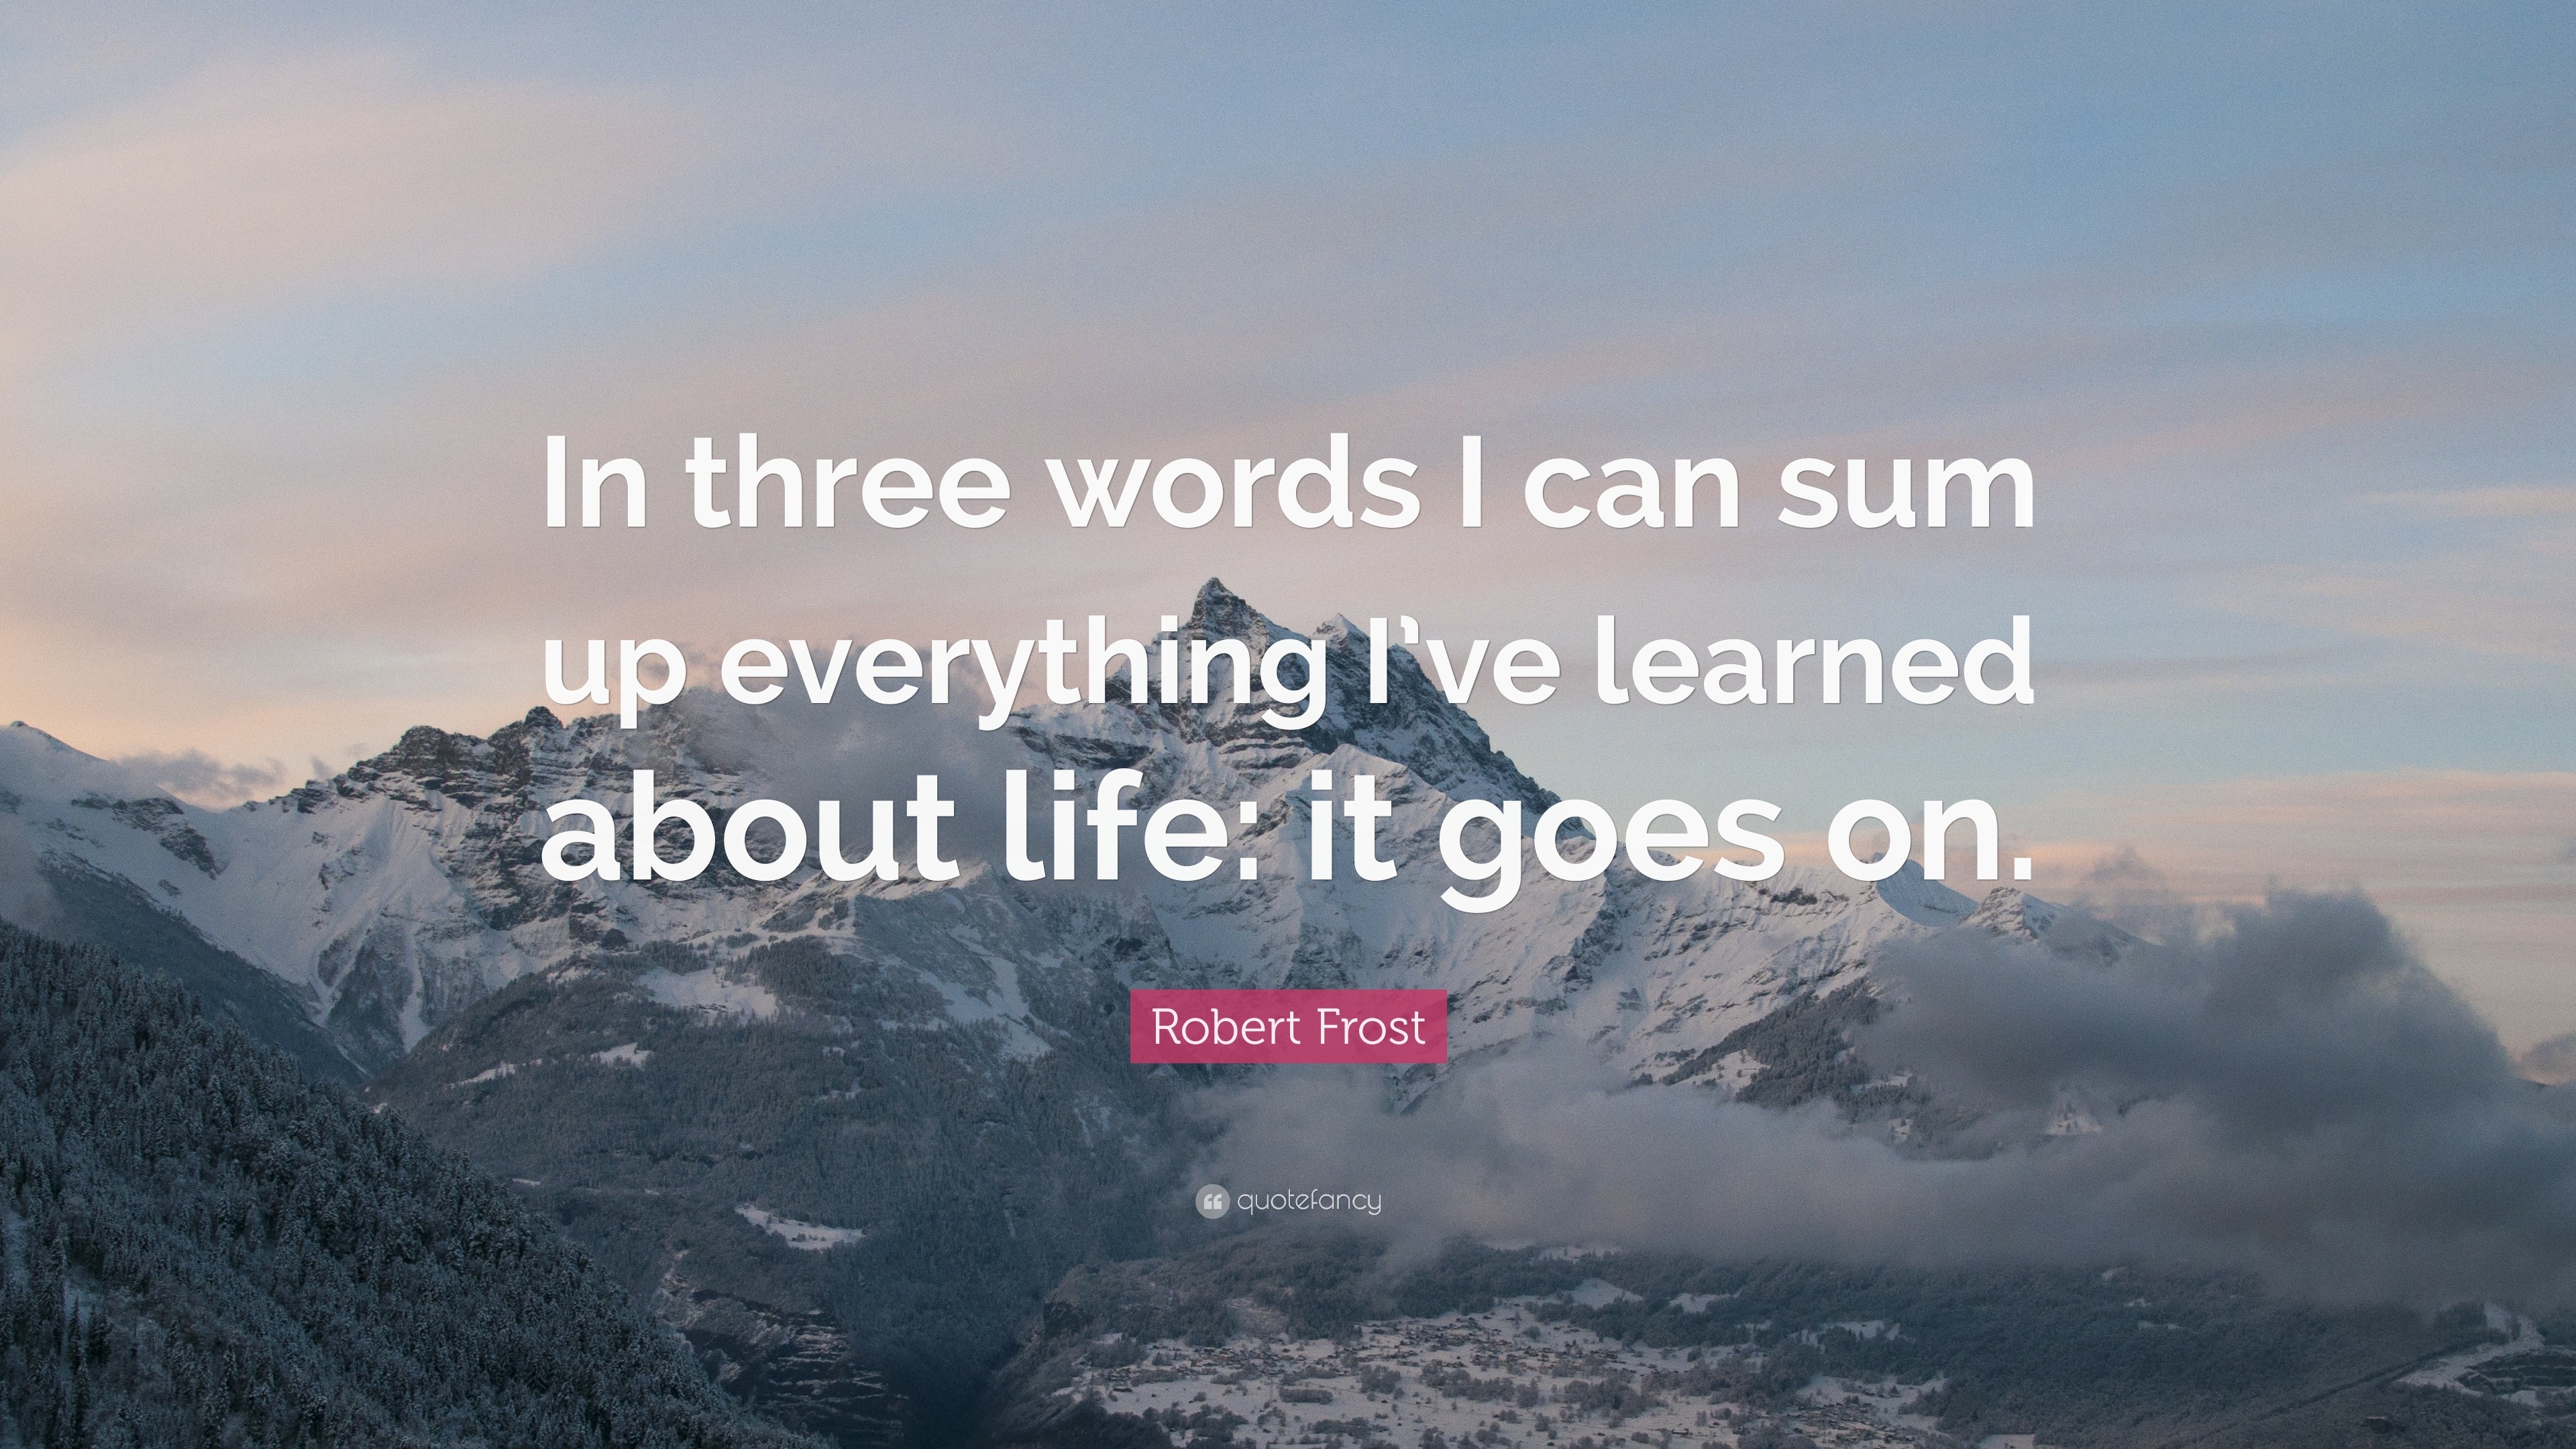 Robert Frost Quote “In three words I can sum up